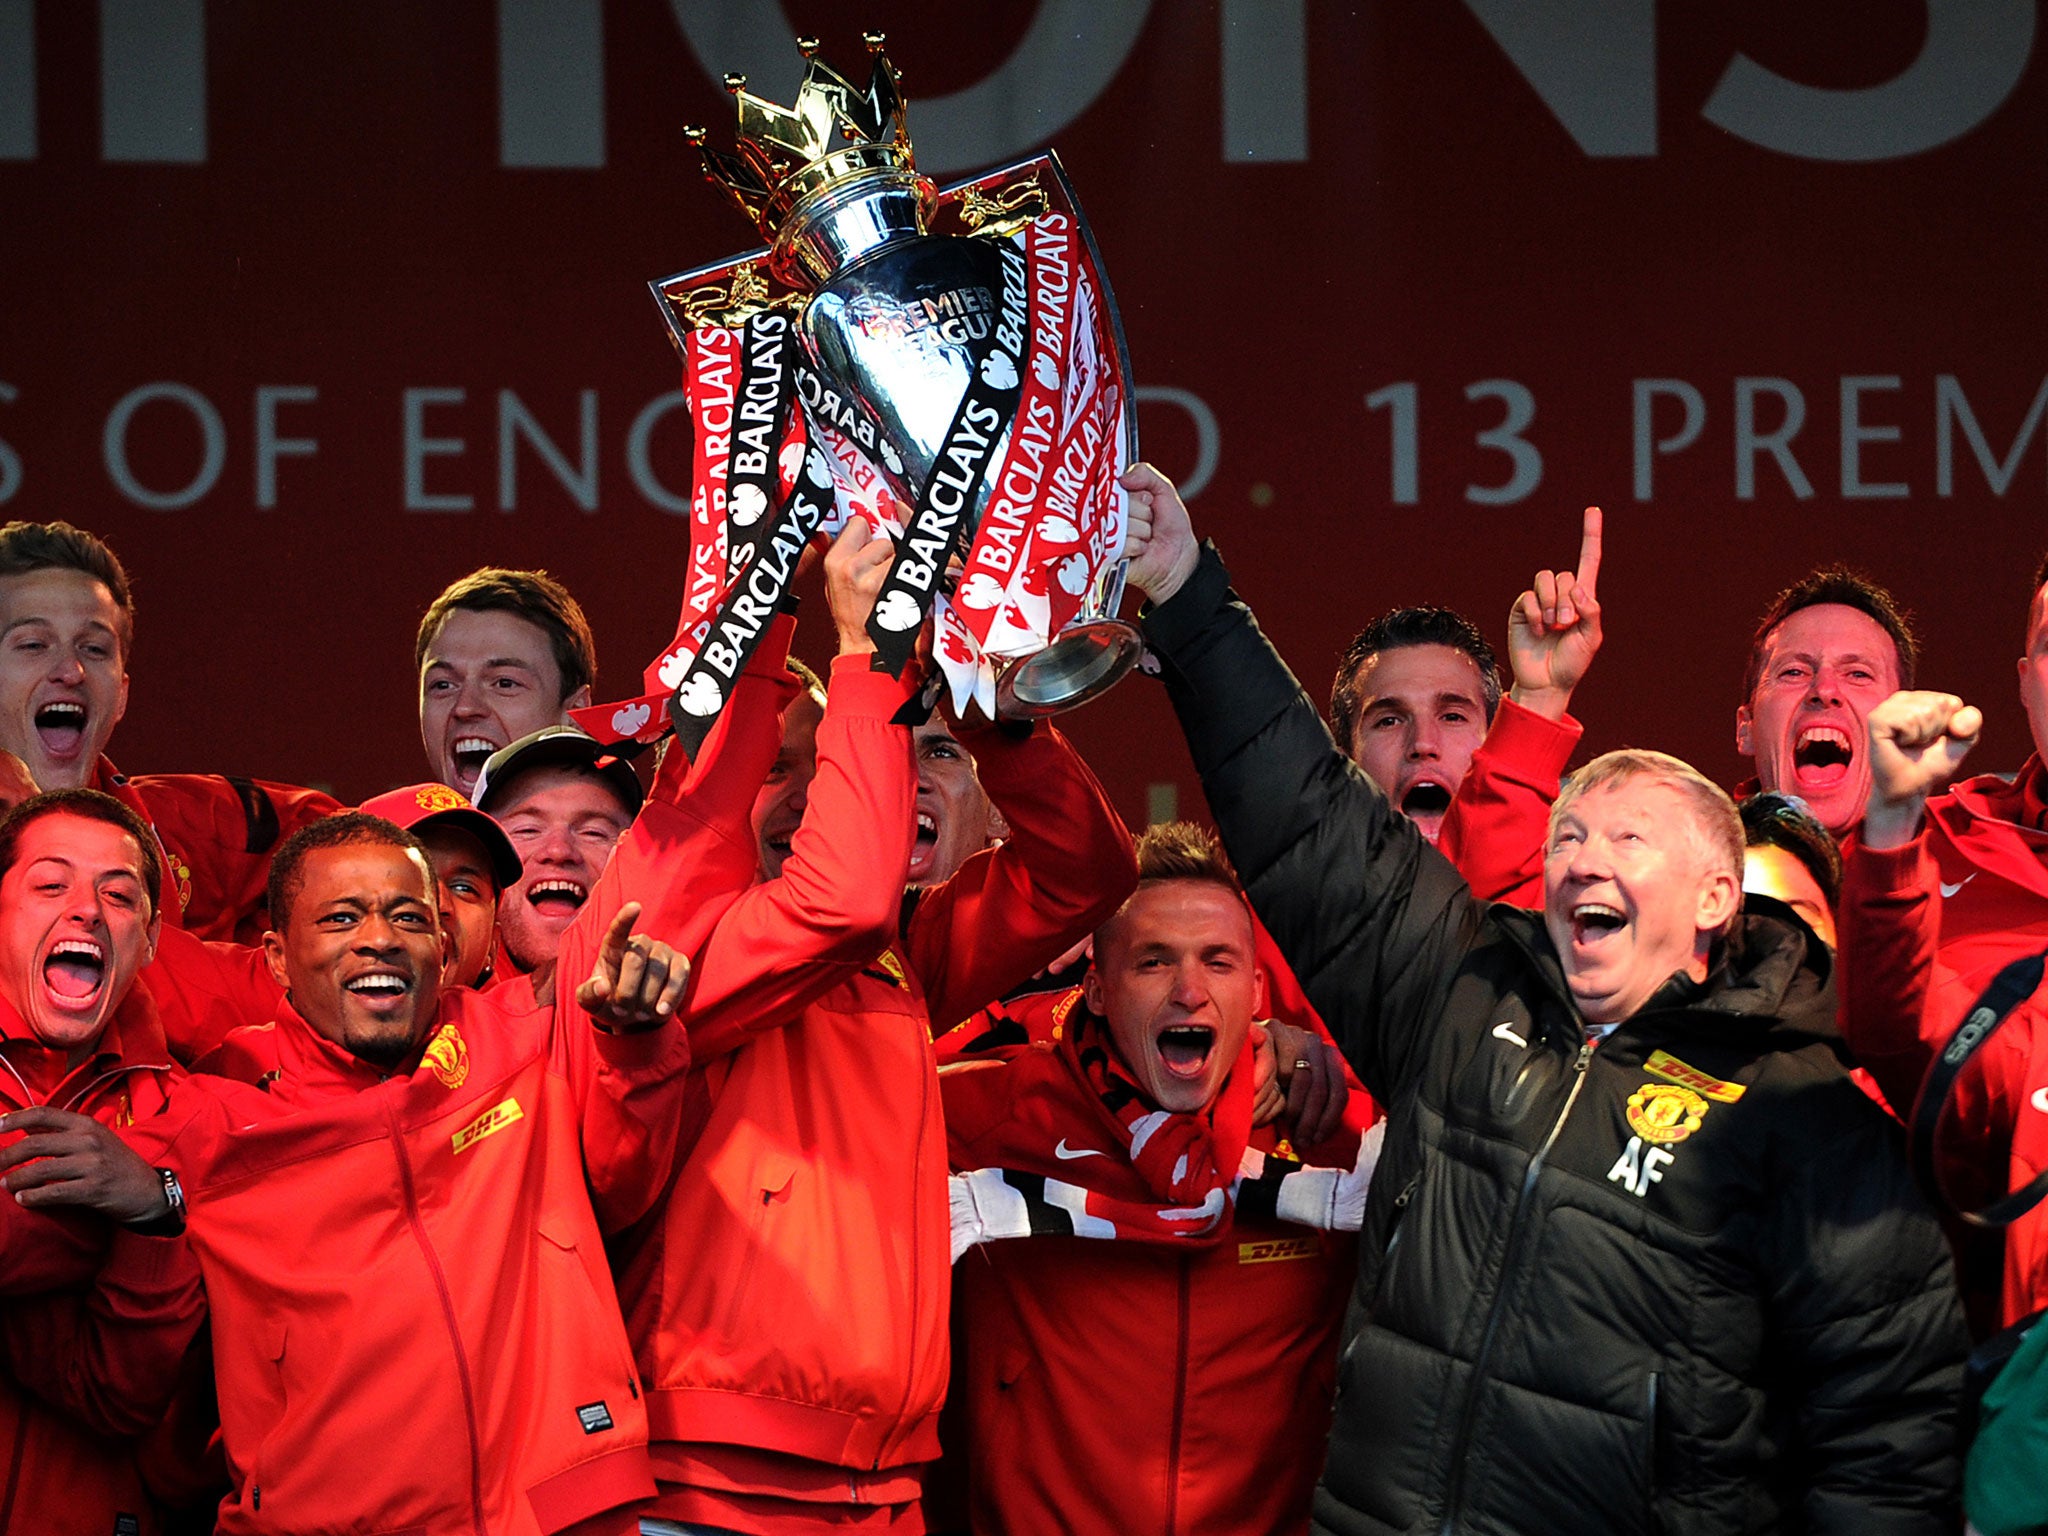 Manchester United celebrate winning the Premier League earlier this year